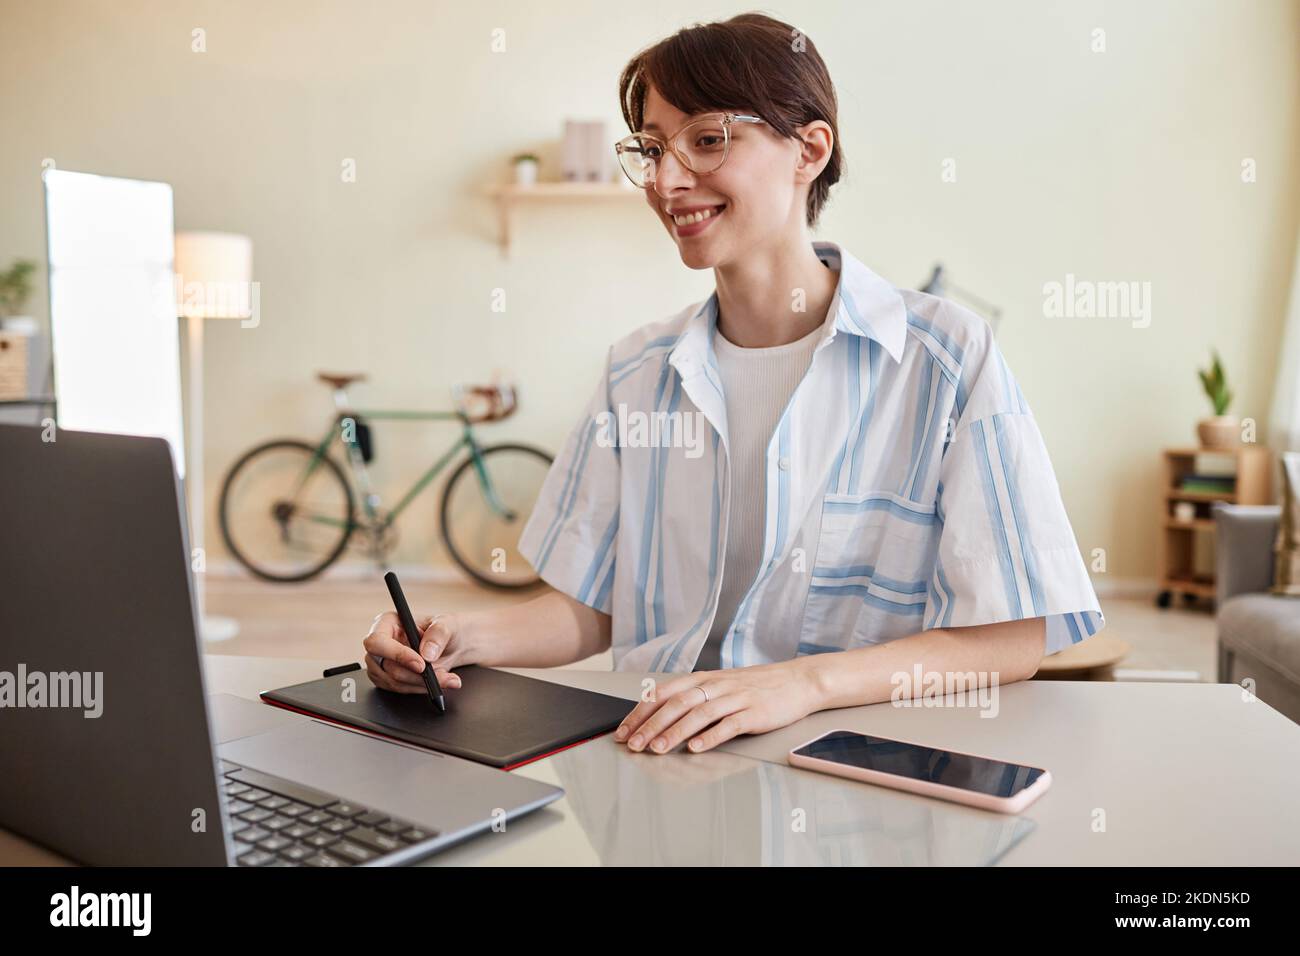 Portrait of smiling young woman using pen tablet at home office workplace for digital design or photo editing Stock Photo